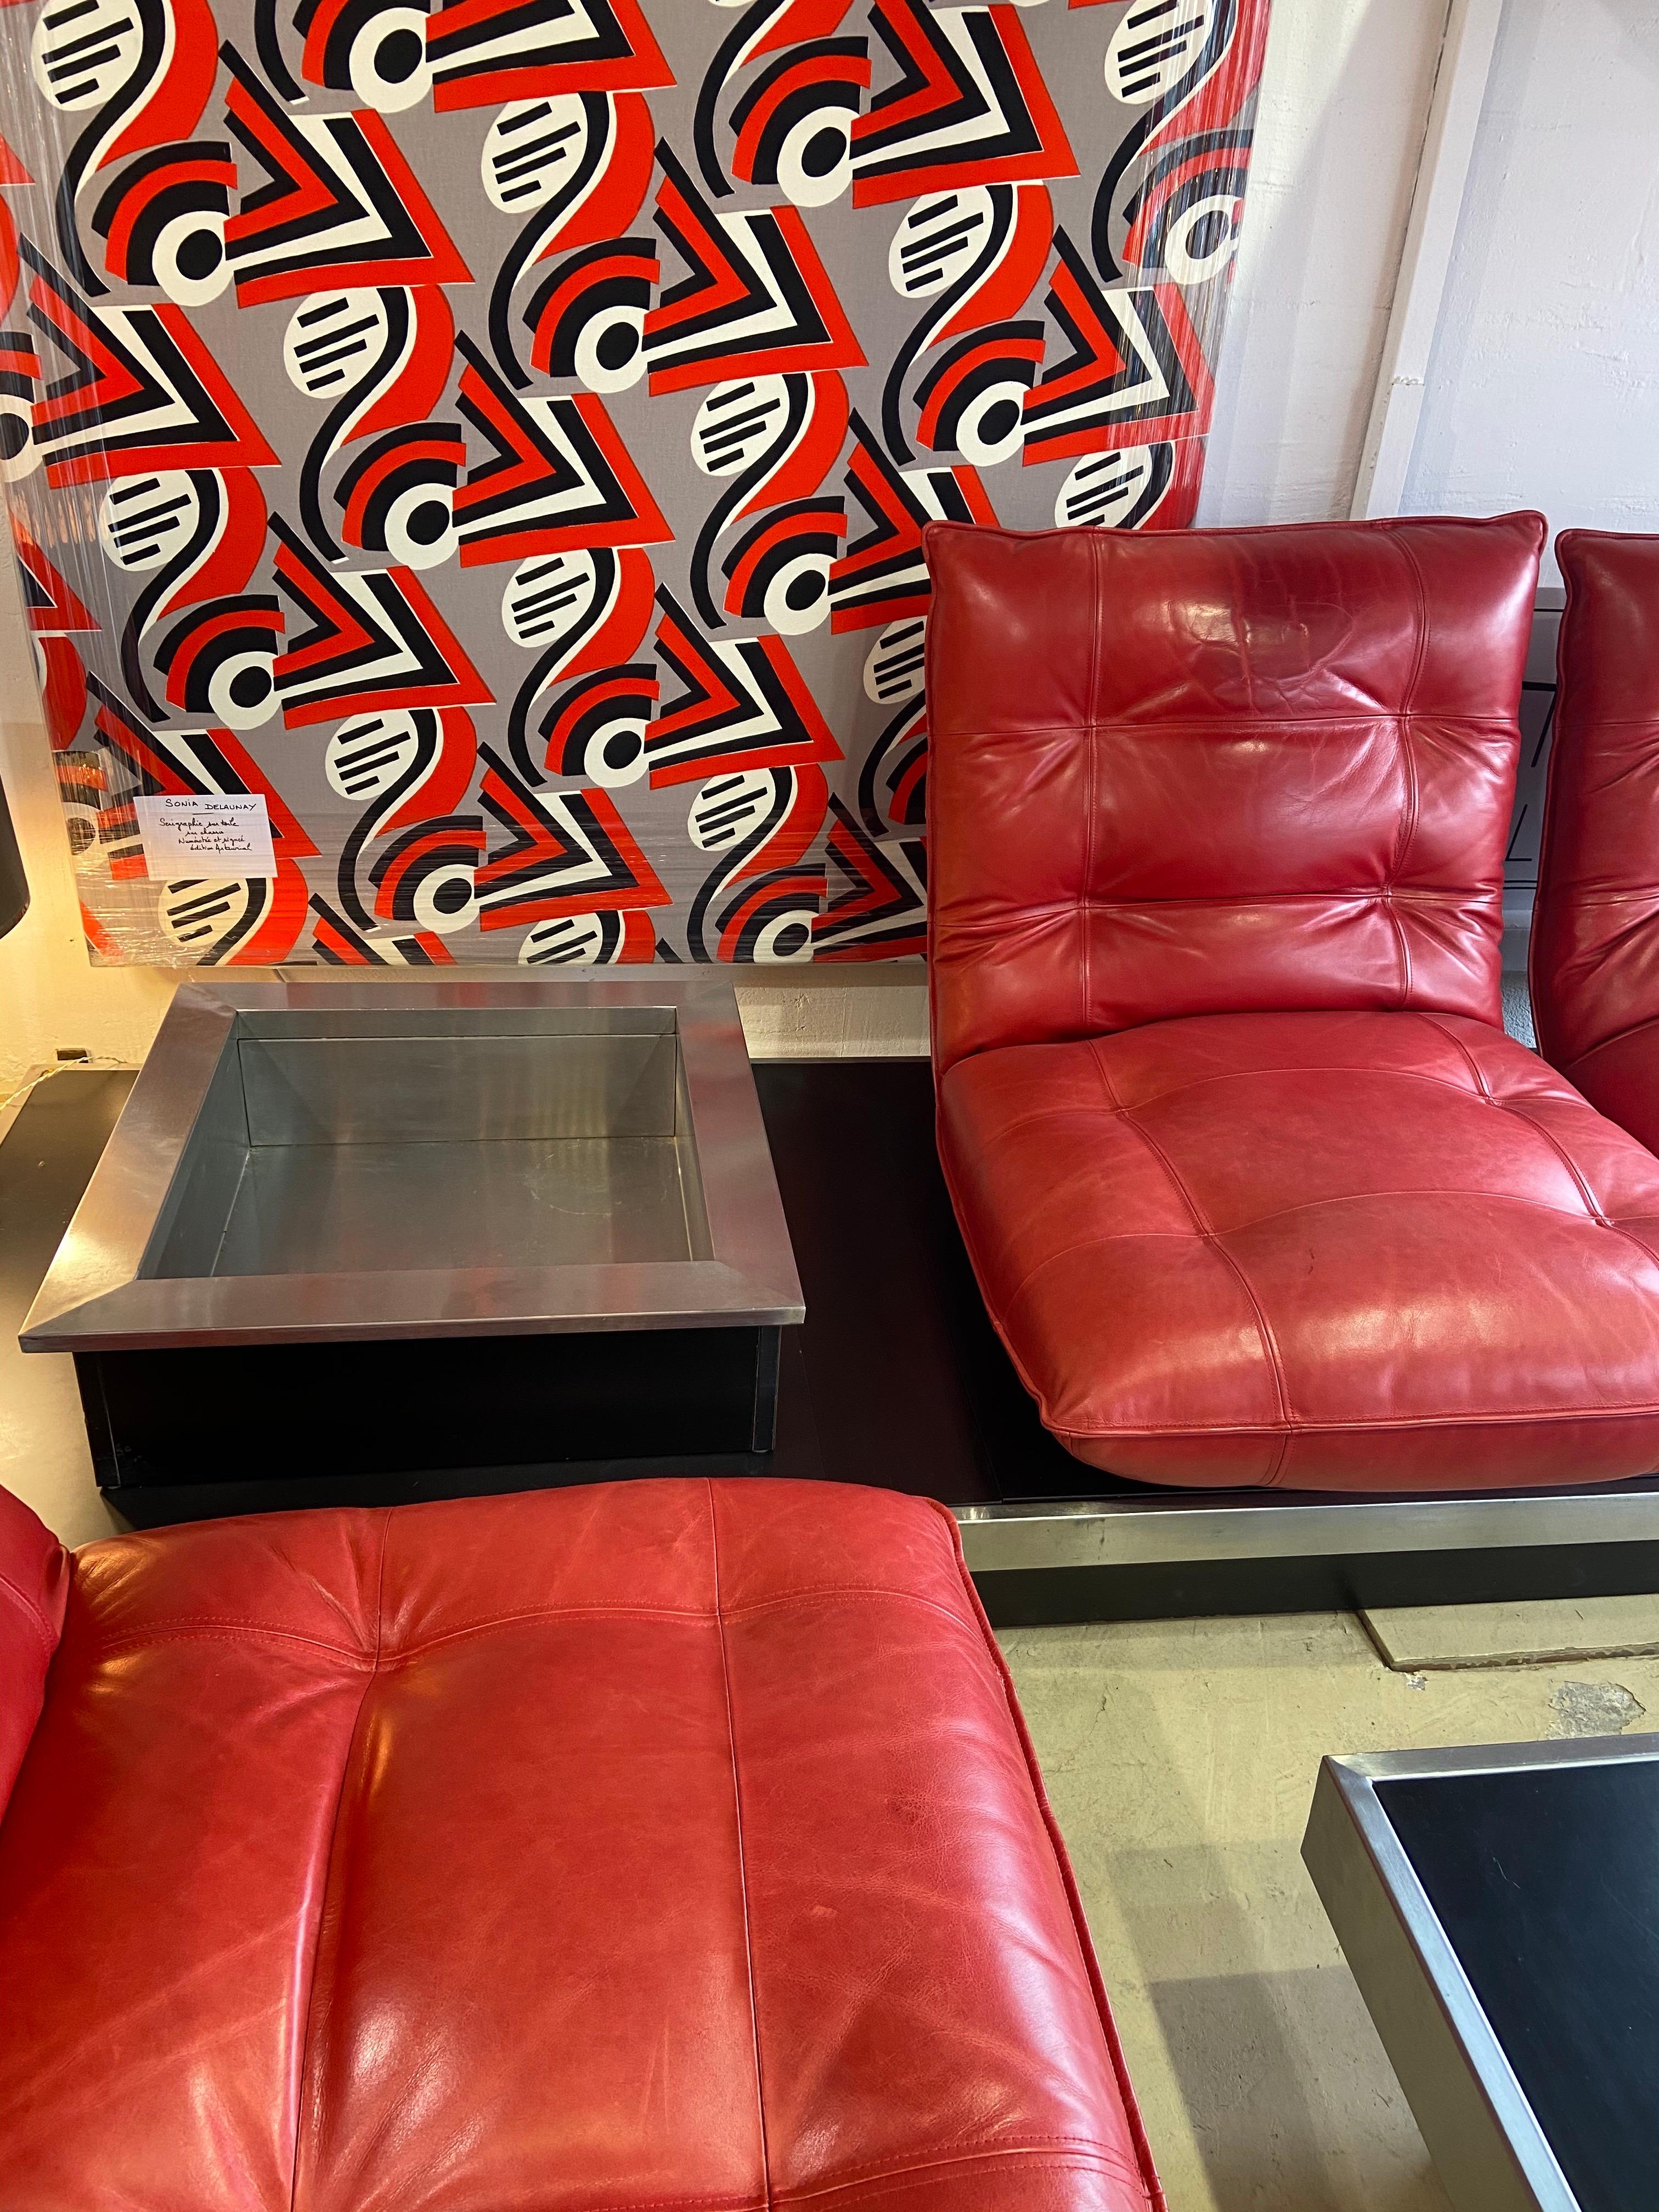 Michel Ducaroy, living room set, 1972
Very rare

Red leather, black melamine and stainless steel

Includes 1 coffee table and 2 benches of 2 armchairs and 1 plant or bottle holder
Bench 1: 270 x 86cm
Bench 2: 194 x 86cm
Table: 111 x